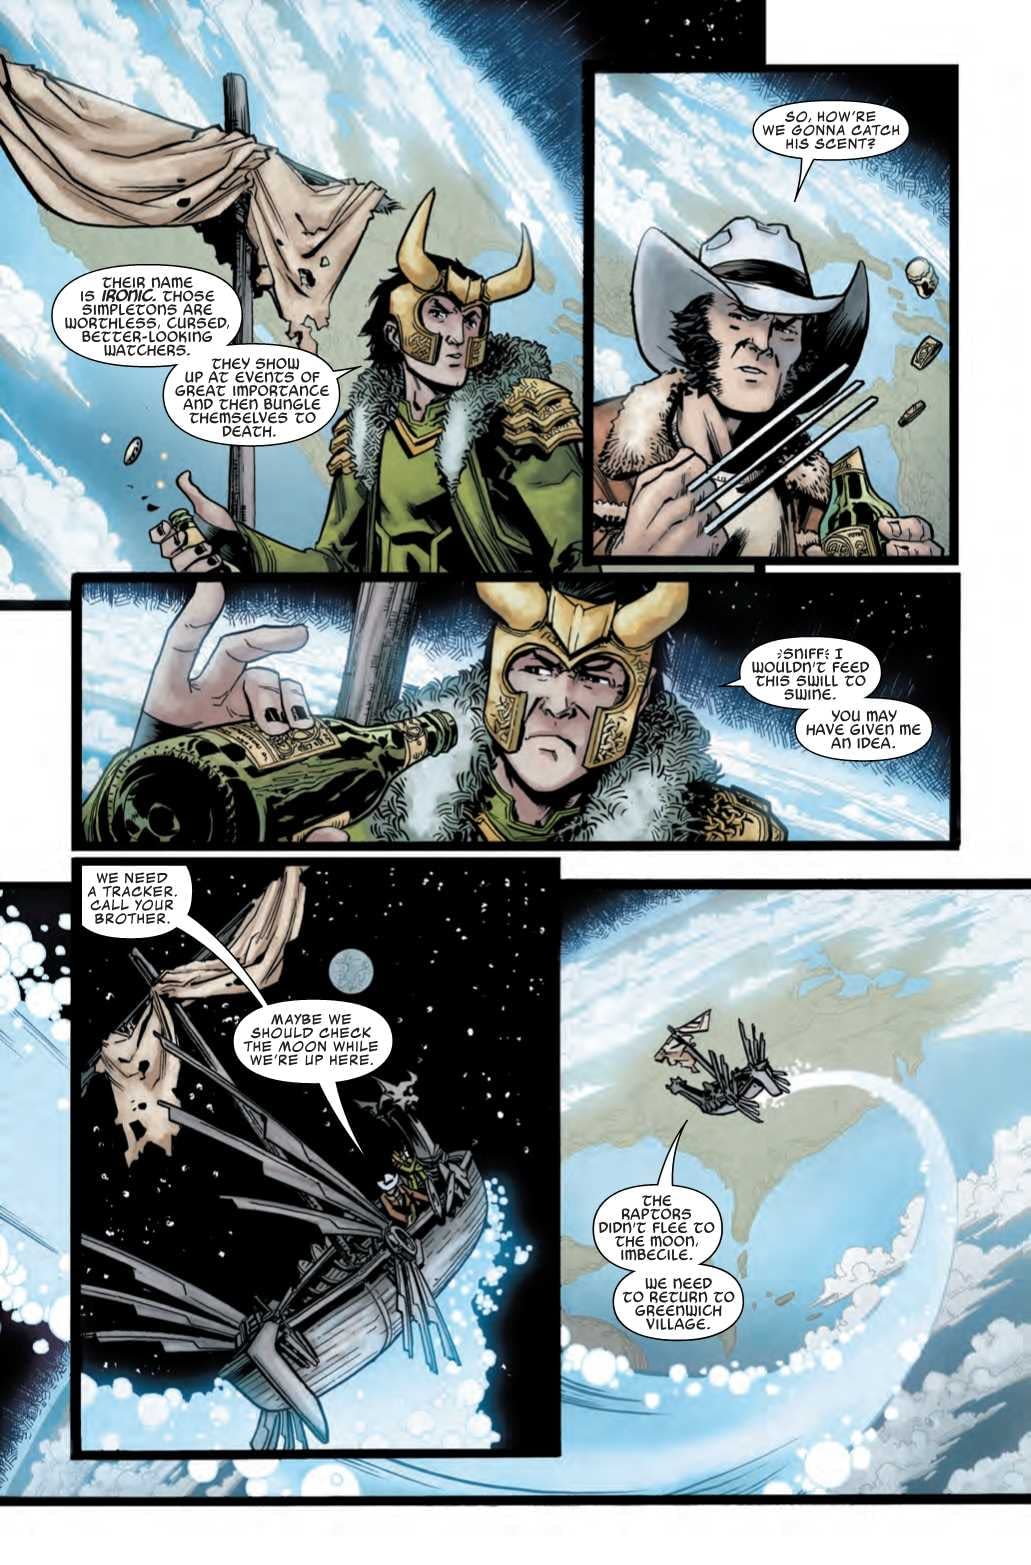 Can Wolverine Drive a Space-Boat While Intoxicated? Wolverine Infinity Watch #3 Preview